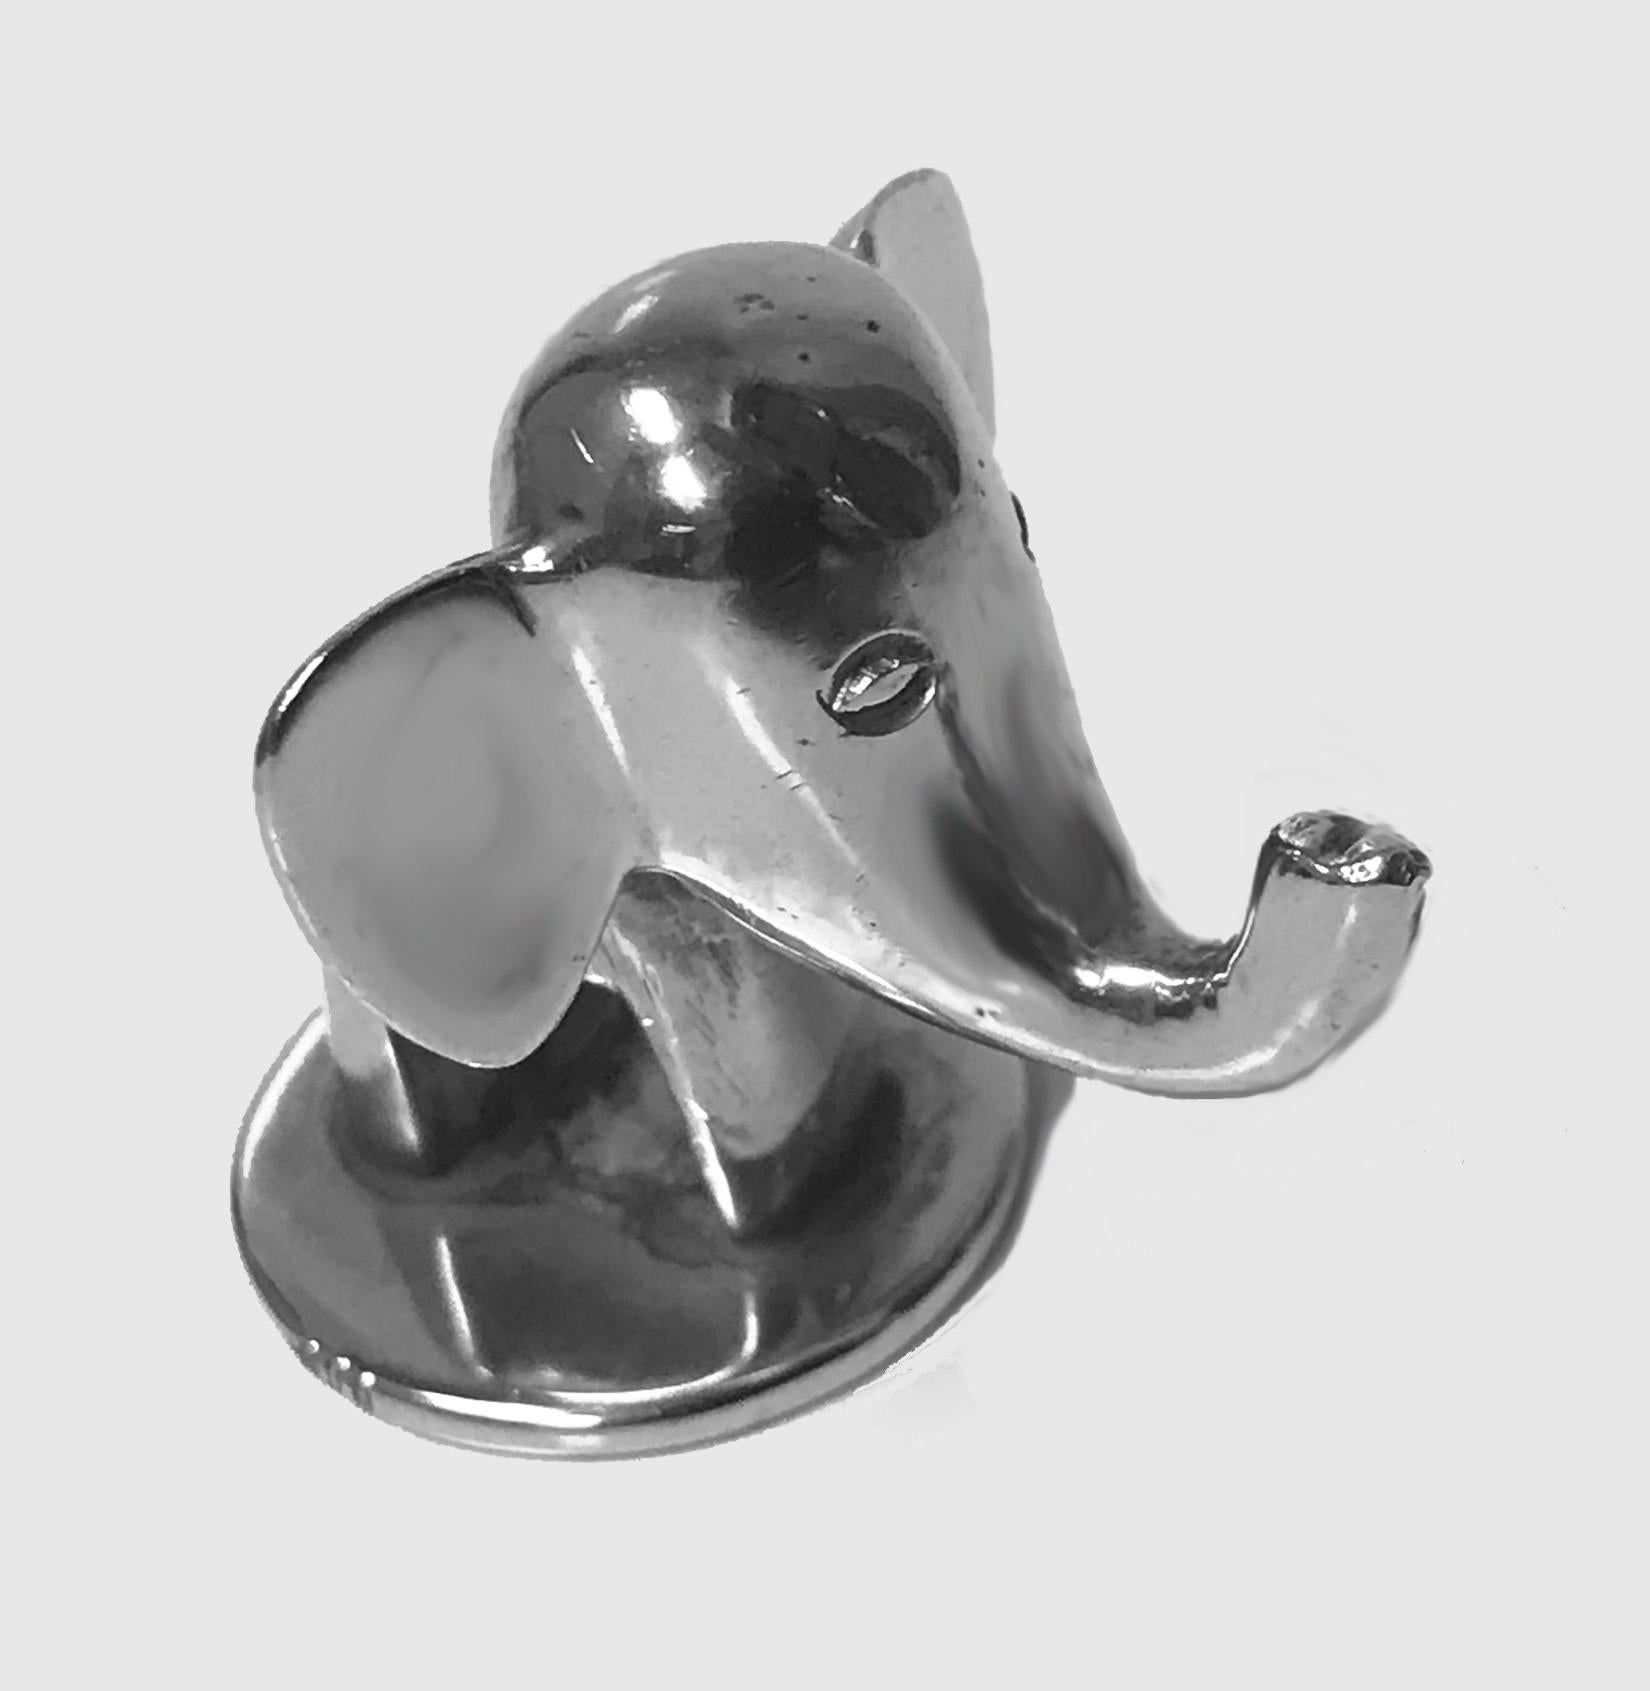 Silver 1950’S Hagenauer style trumpeting Elephant. Stamped 900. Good solid example. Item Weight: 58 grams. Measures: 1.5 x 1.5 inches